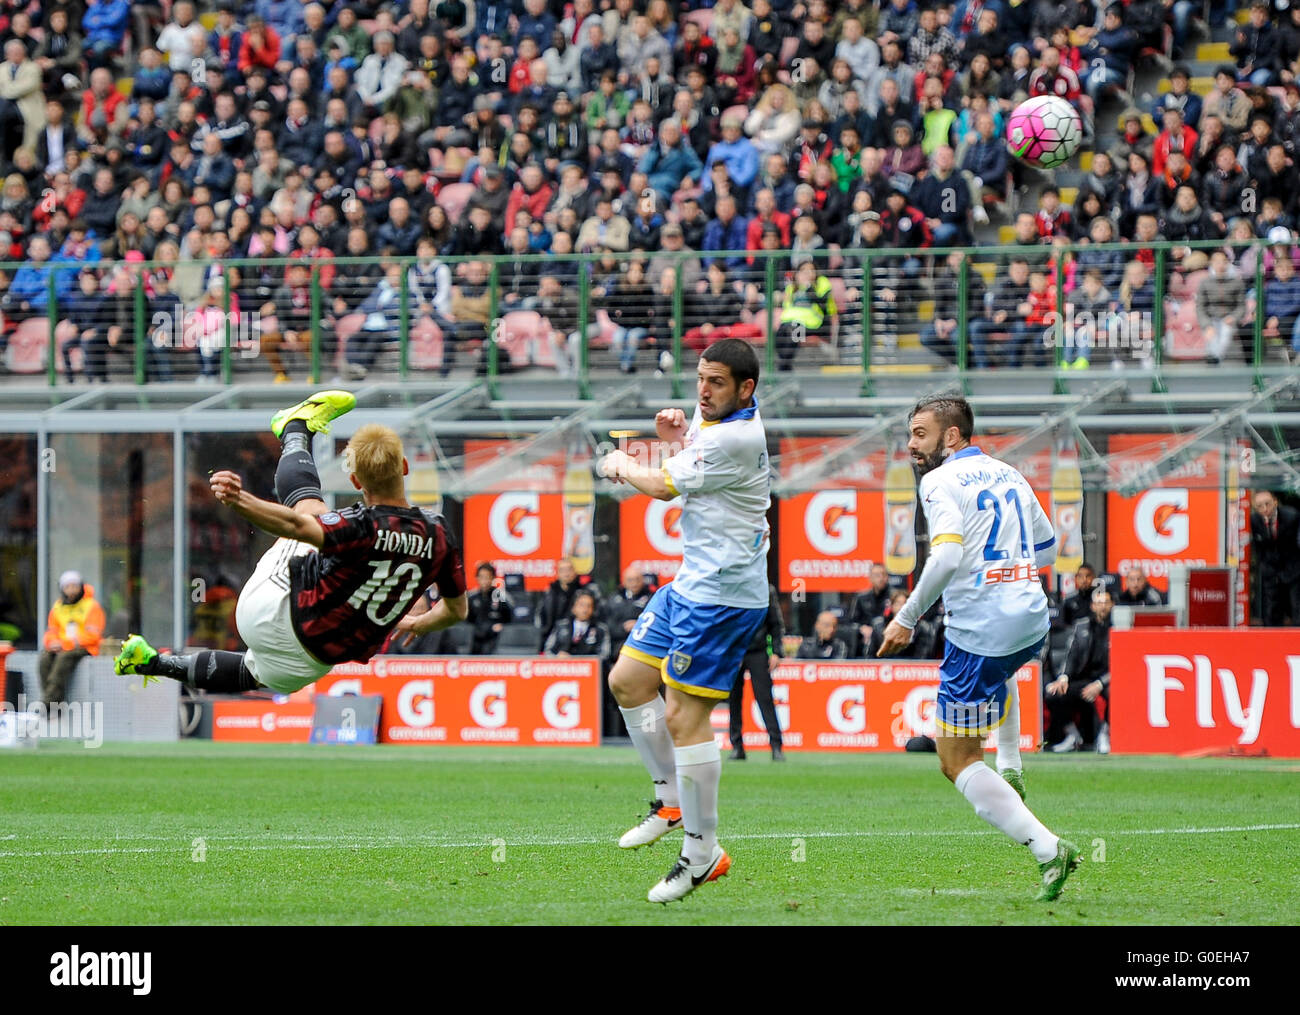 Milan, Italy. 1 may, 2016: Bicycle kick by Keisuke Honda during the Serie A football match between AC Milan and Frosinone Calcio Credit:  Nicolò Campo/Alamy Live News Stock Photo